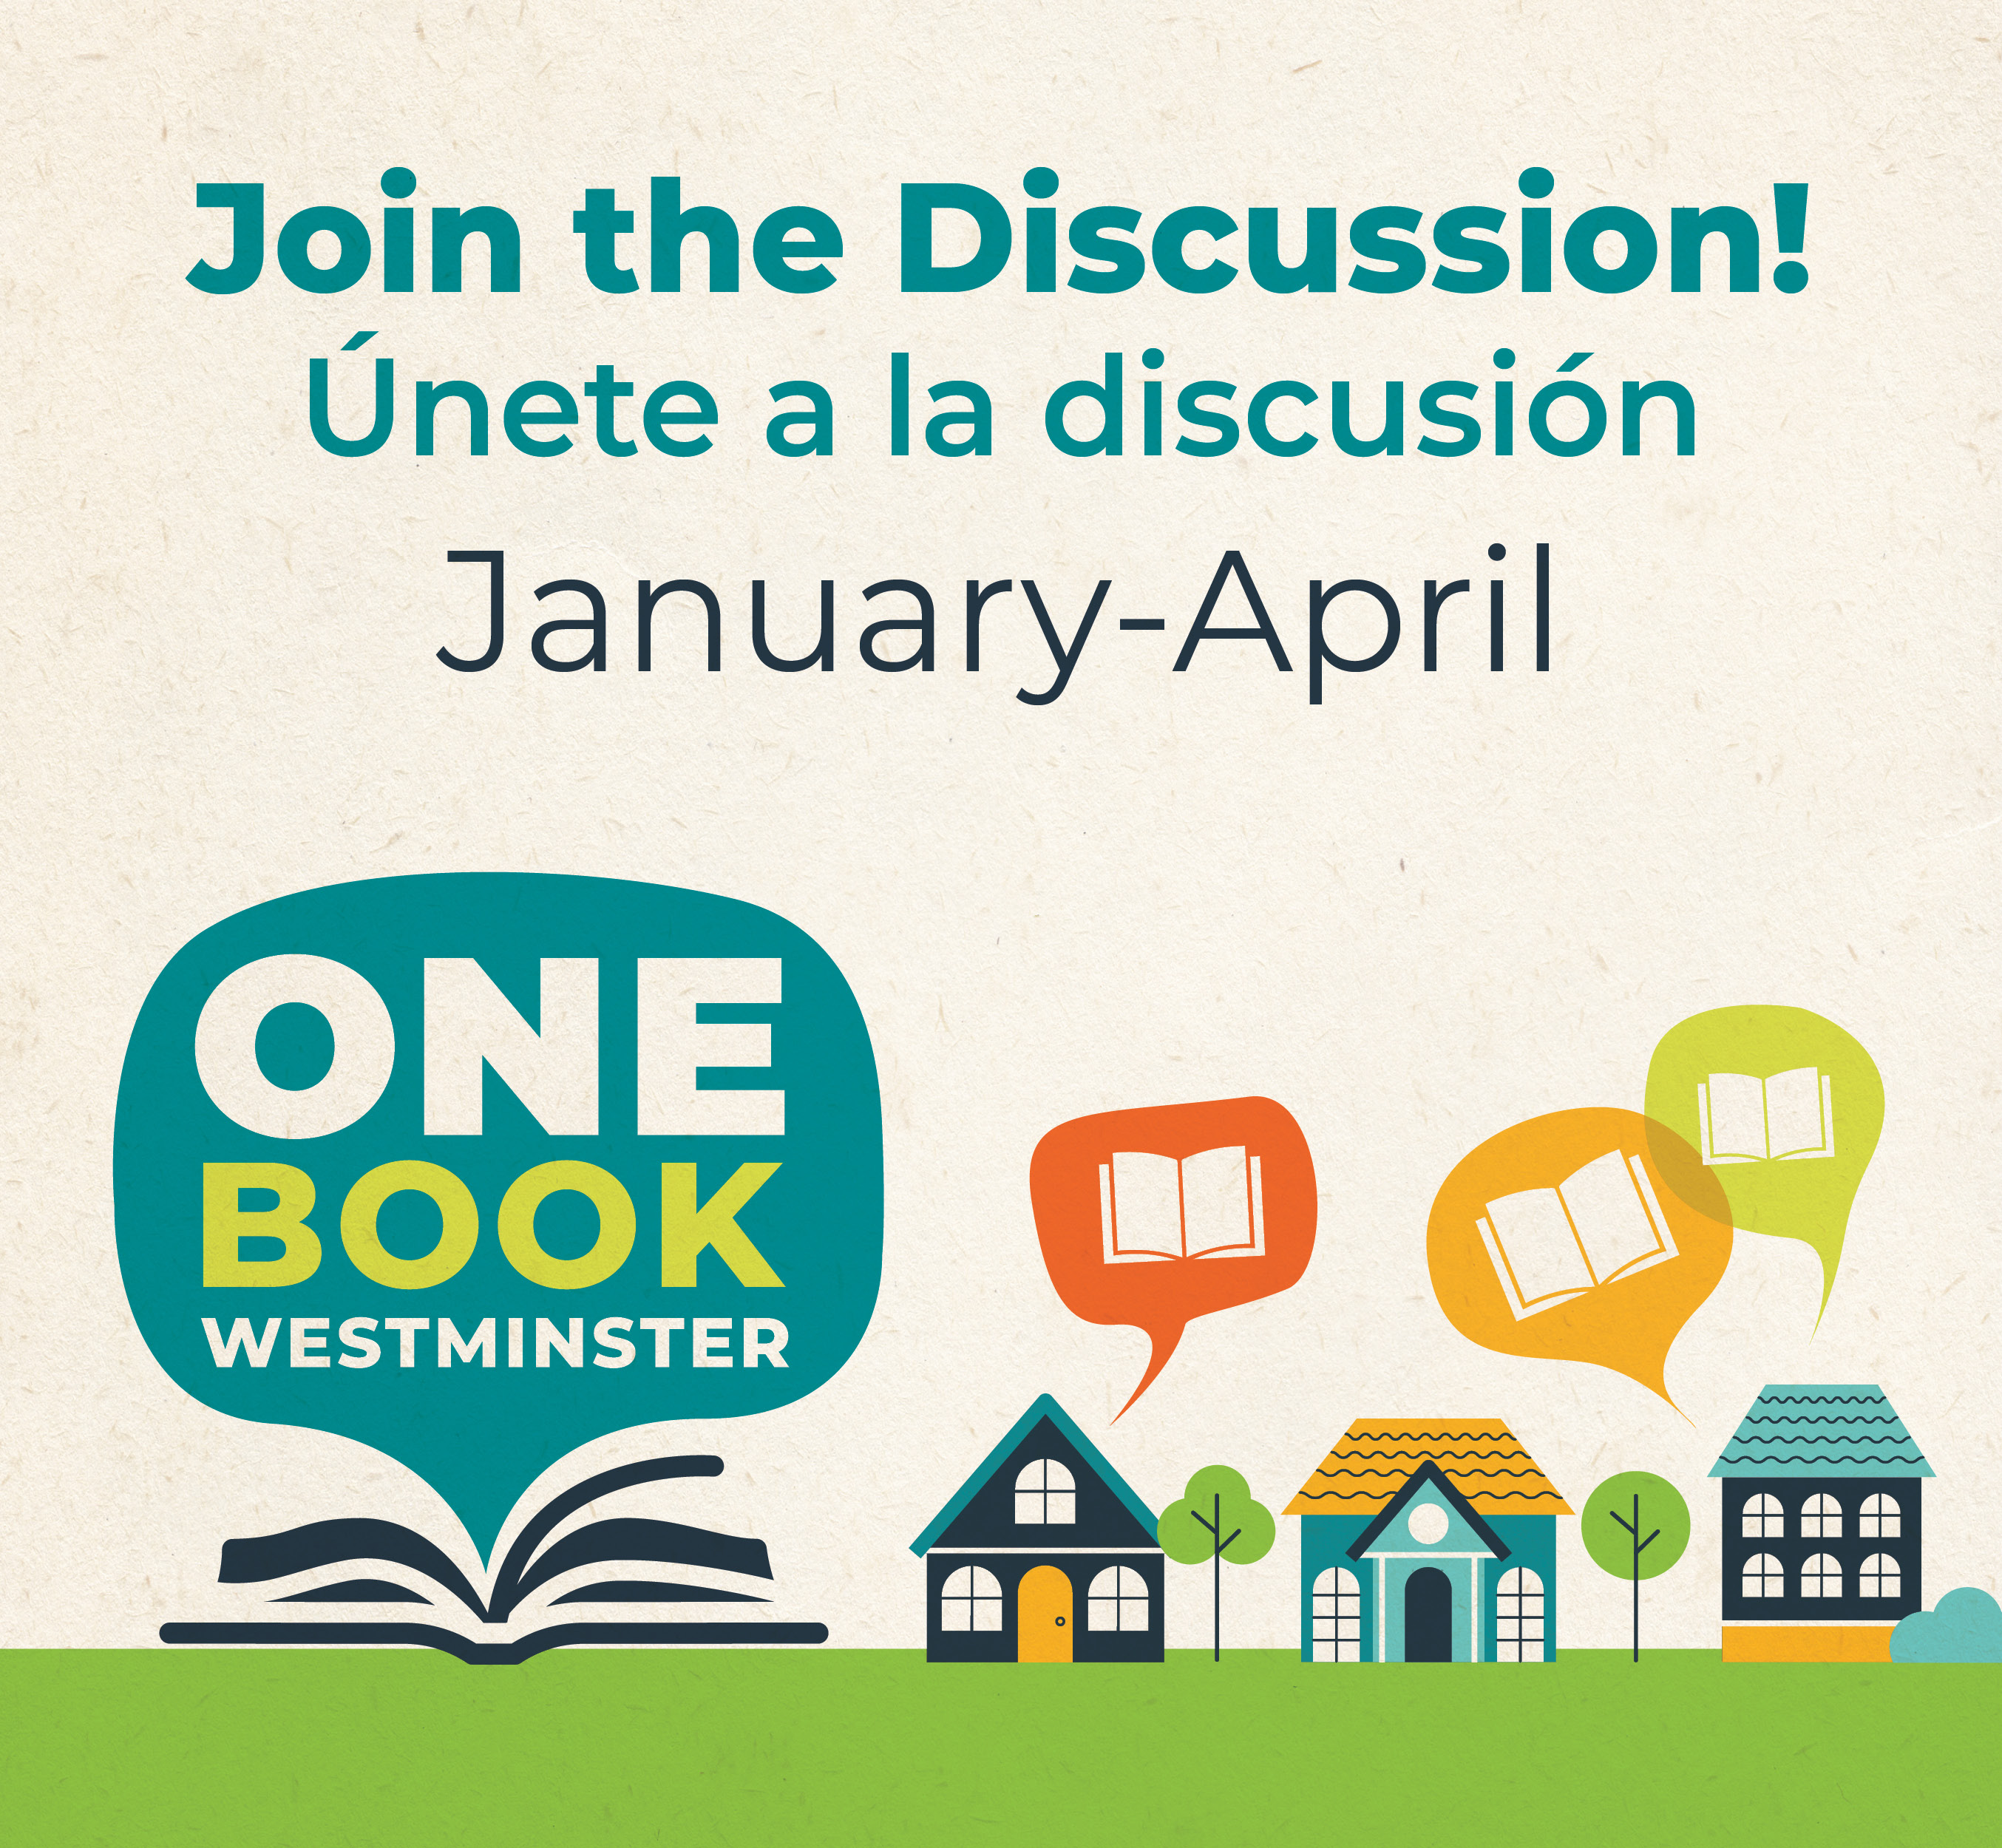 Join the Discussion: One Book Westminster